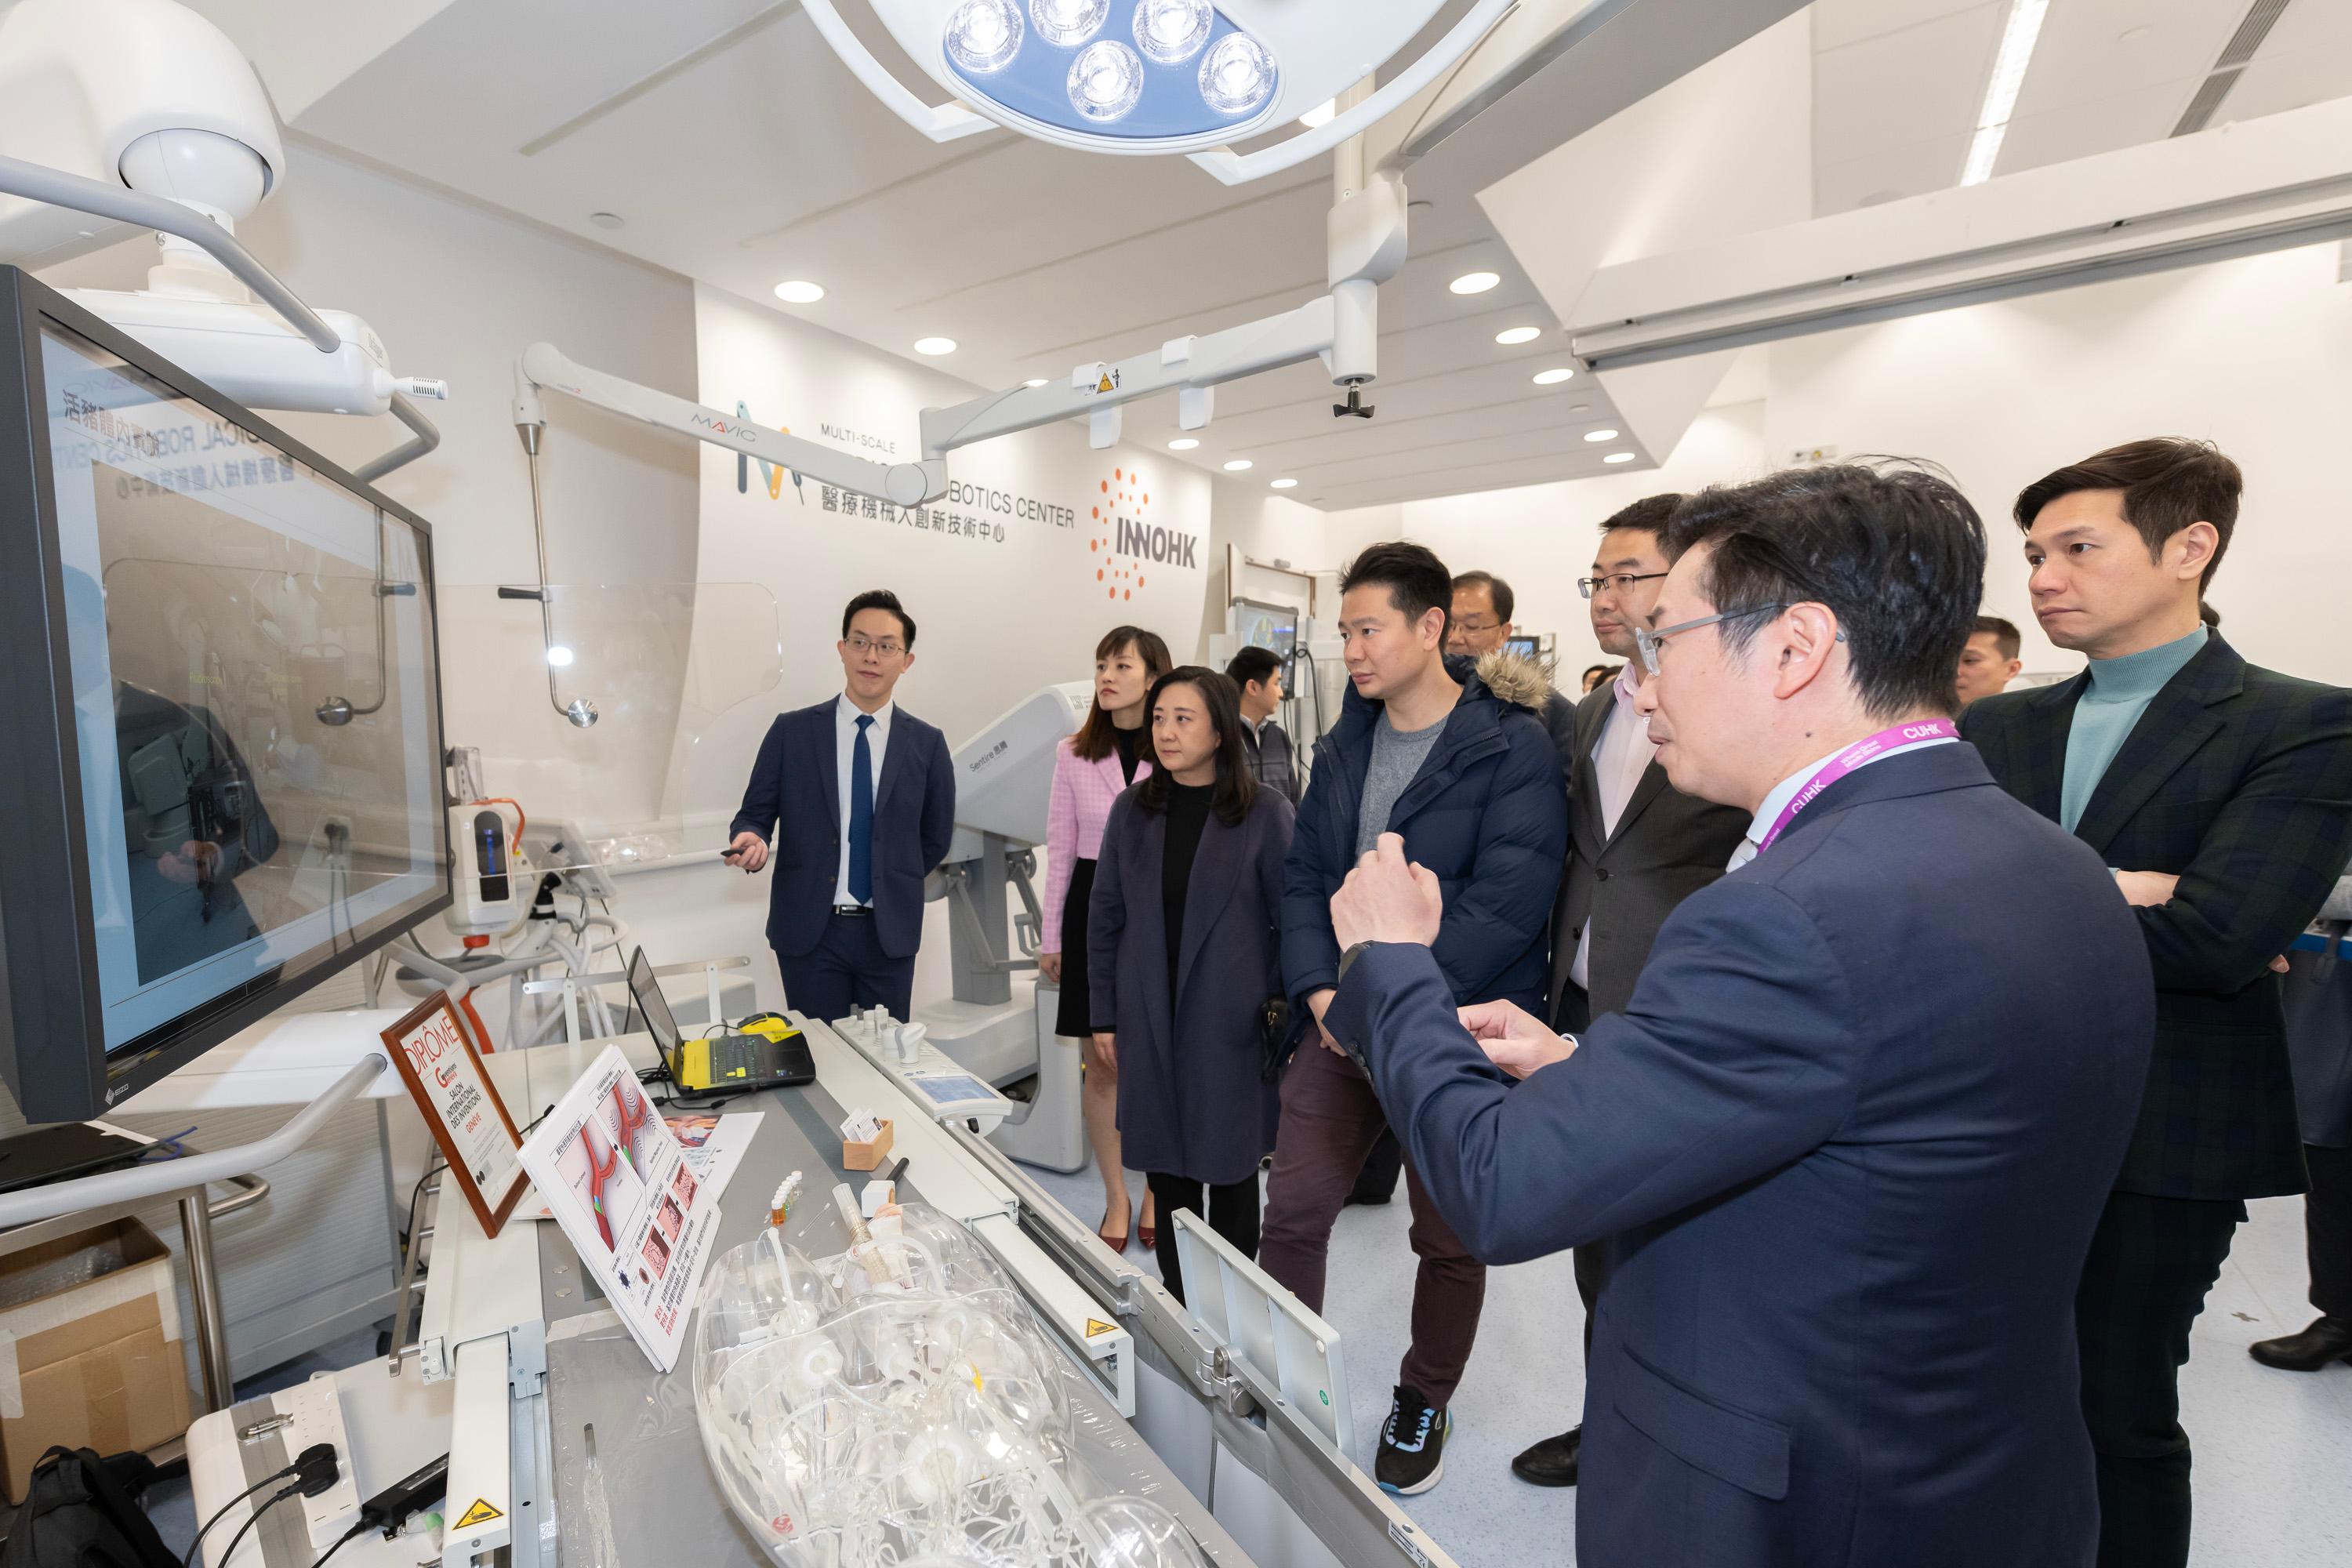 The Legislative Council Subcommittee on Matters Relating to the Promotion of New Industrialization visited the InnoHK Research Clusters today (January 29). Photo shows Members learning about the application of medical robotics technologies.